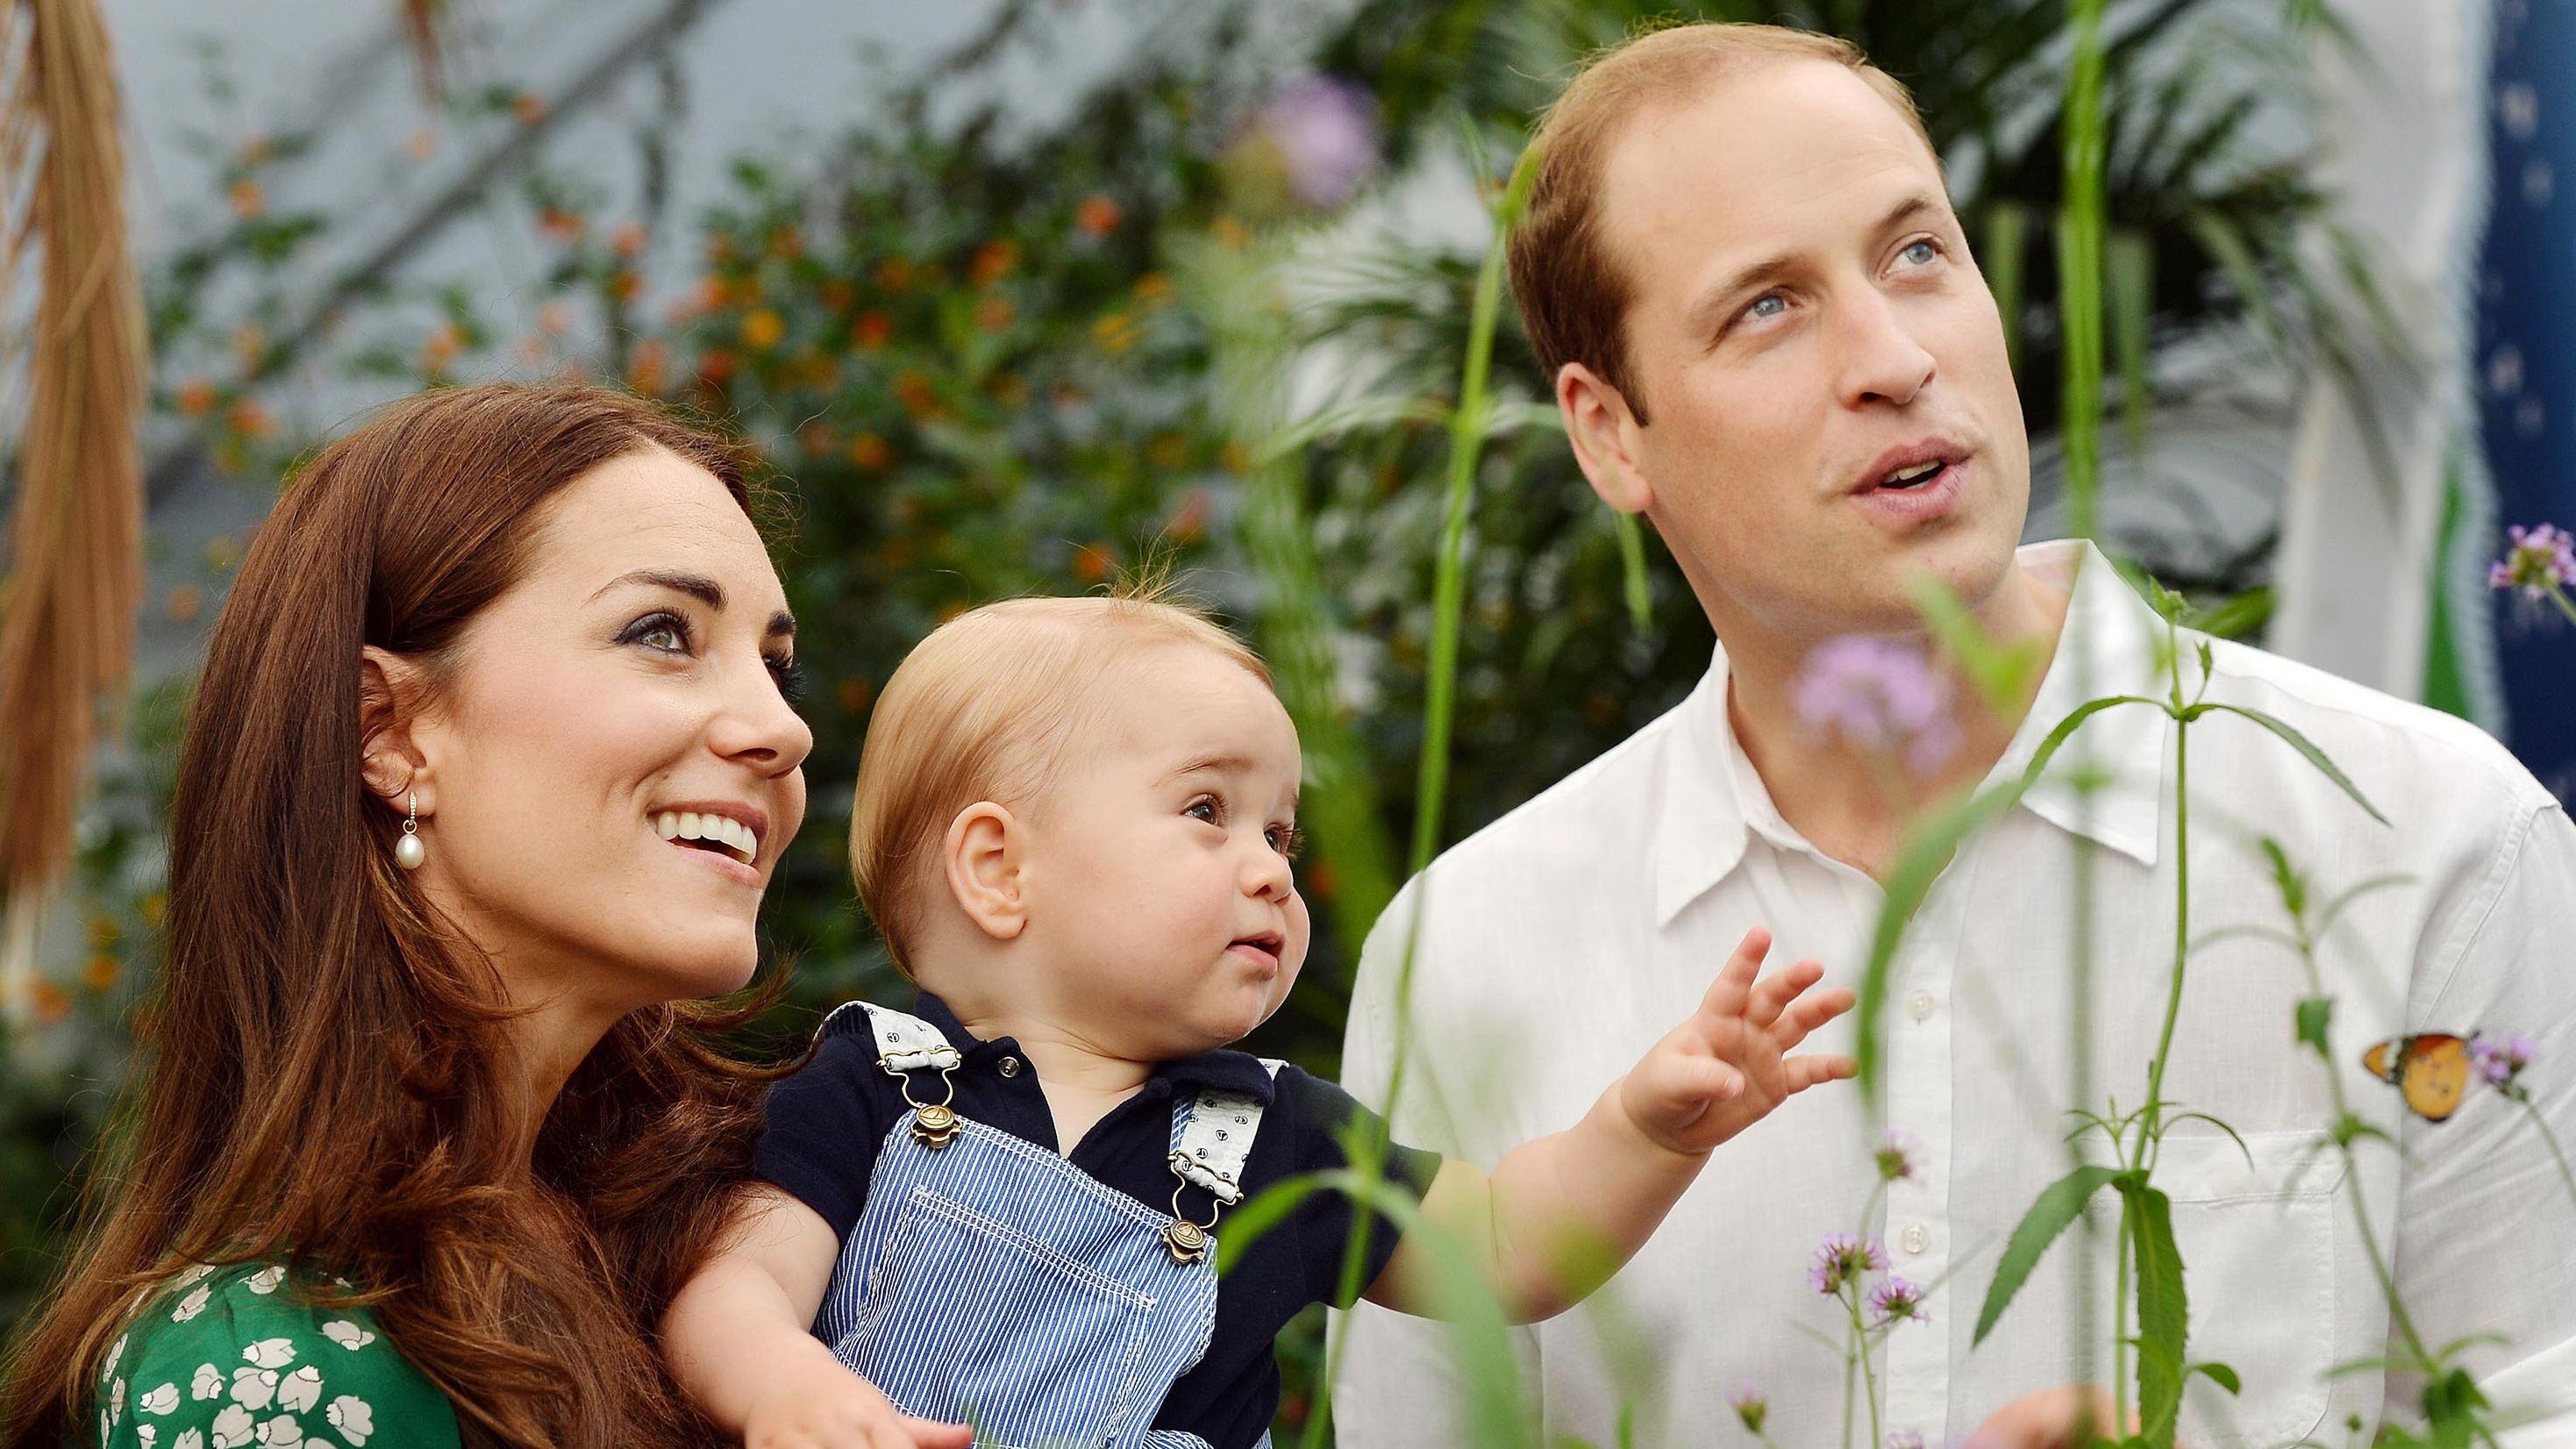 The royal family celebrates Prince George's first birthday with a trip to the Natural History Museum in July 2014.